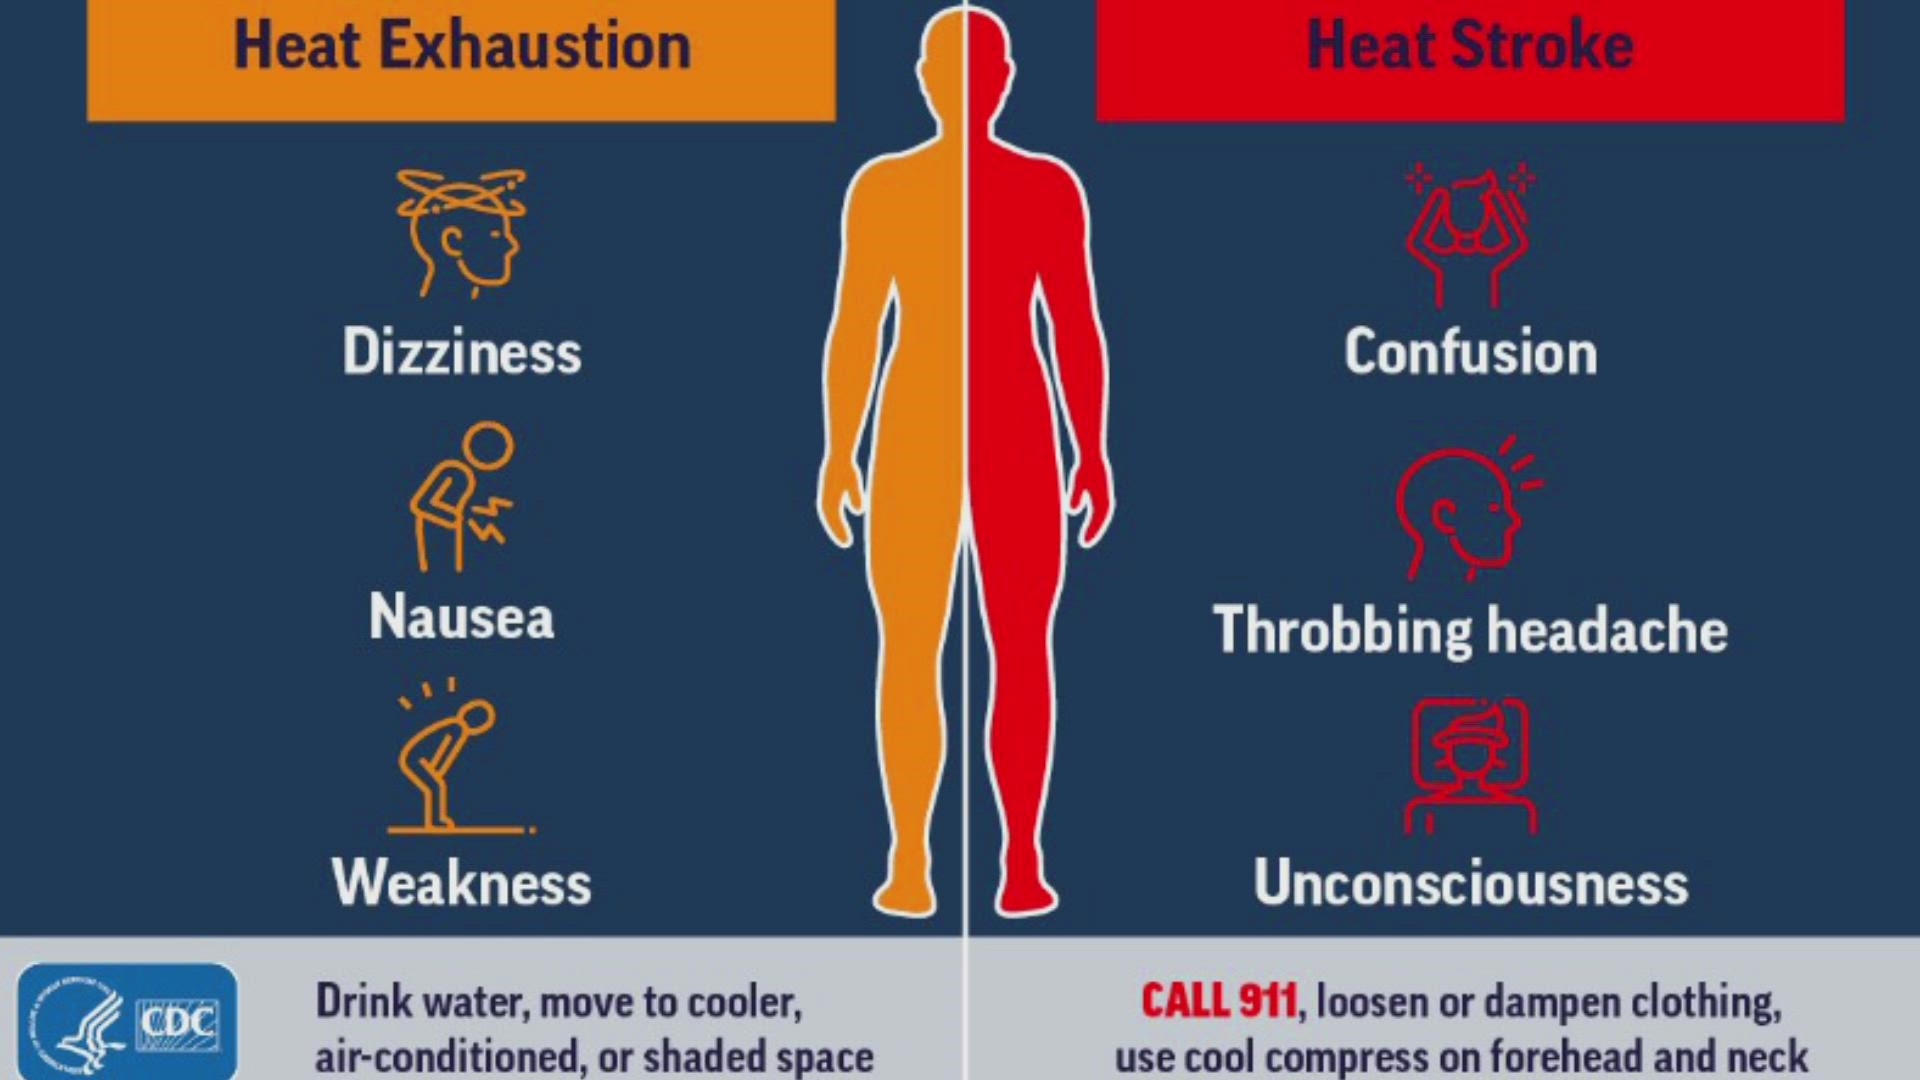 The CDC says to watch our for symptoms of heat stroke and heat exhaustion.